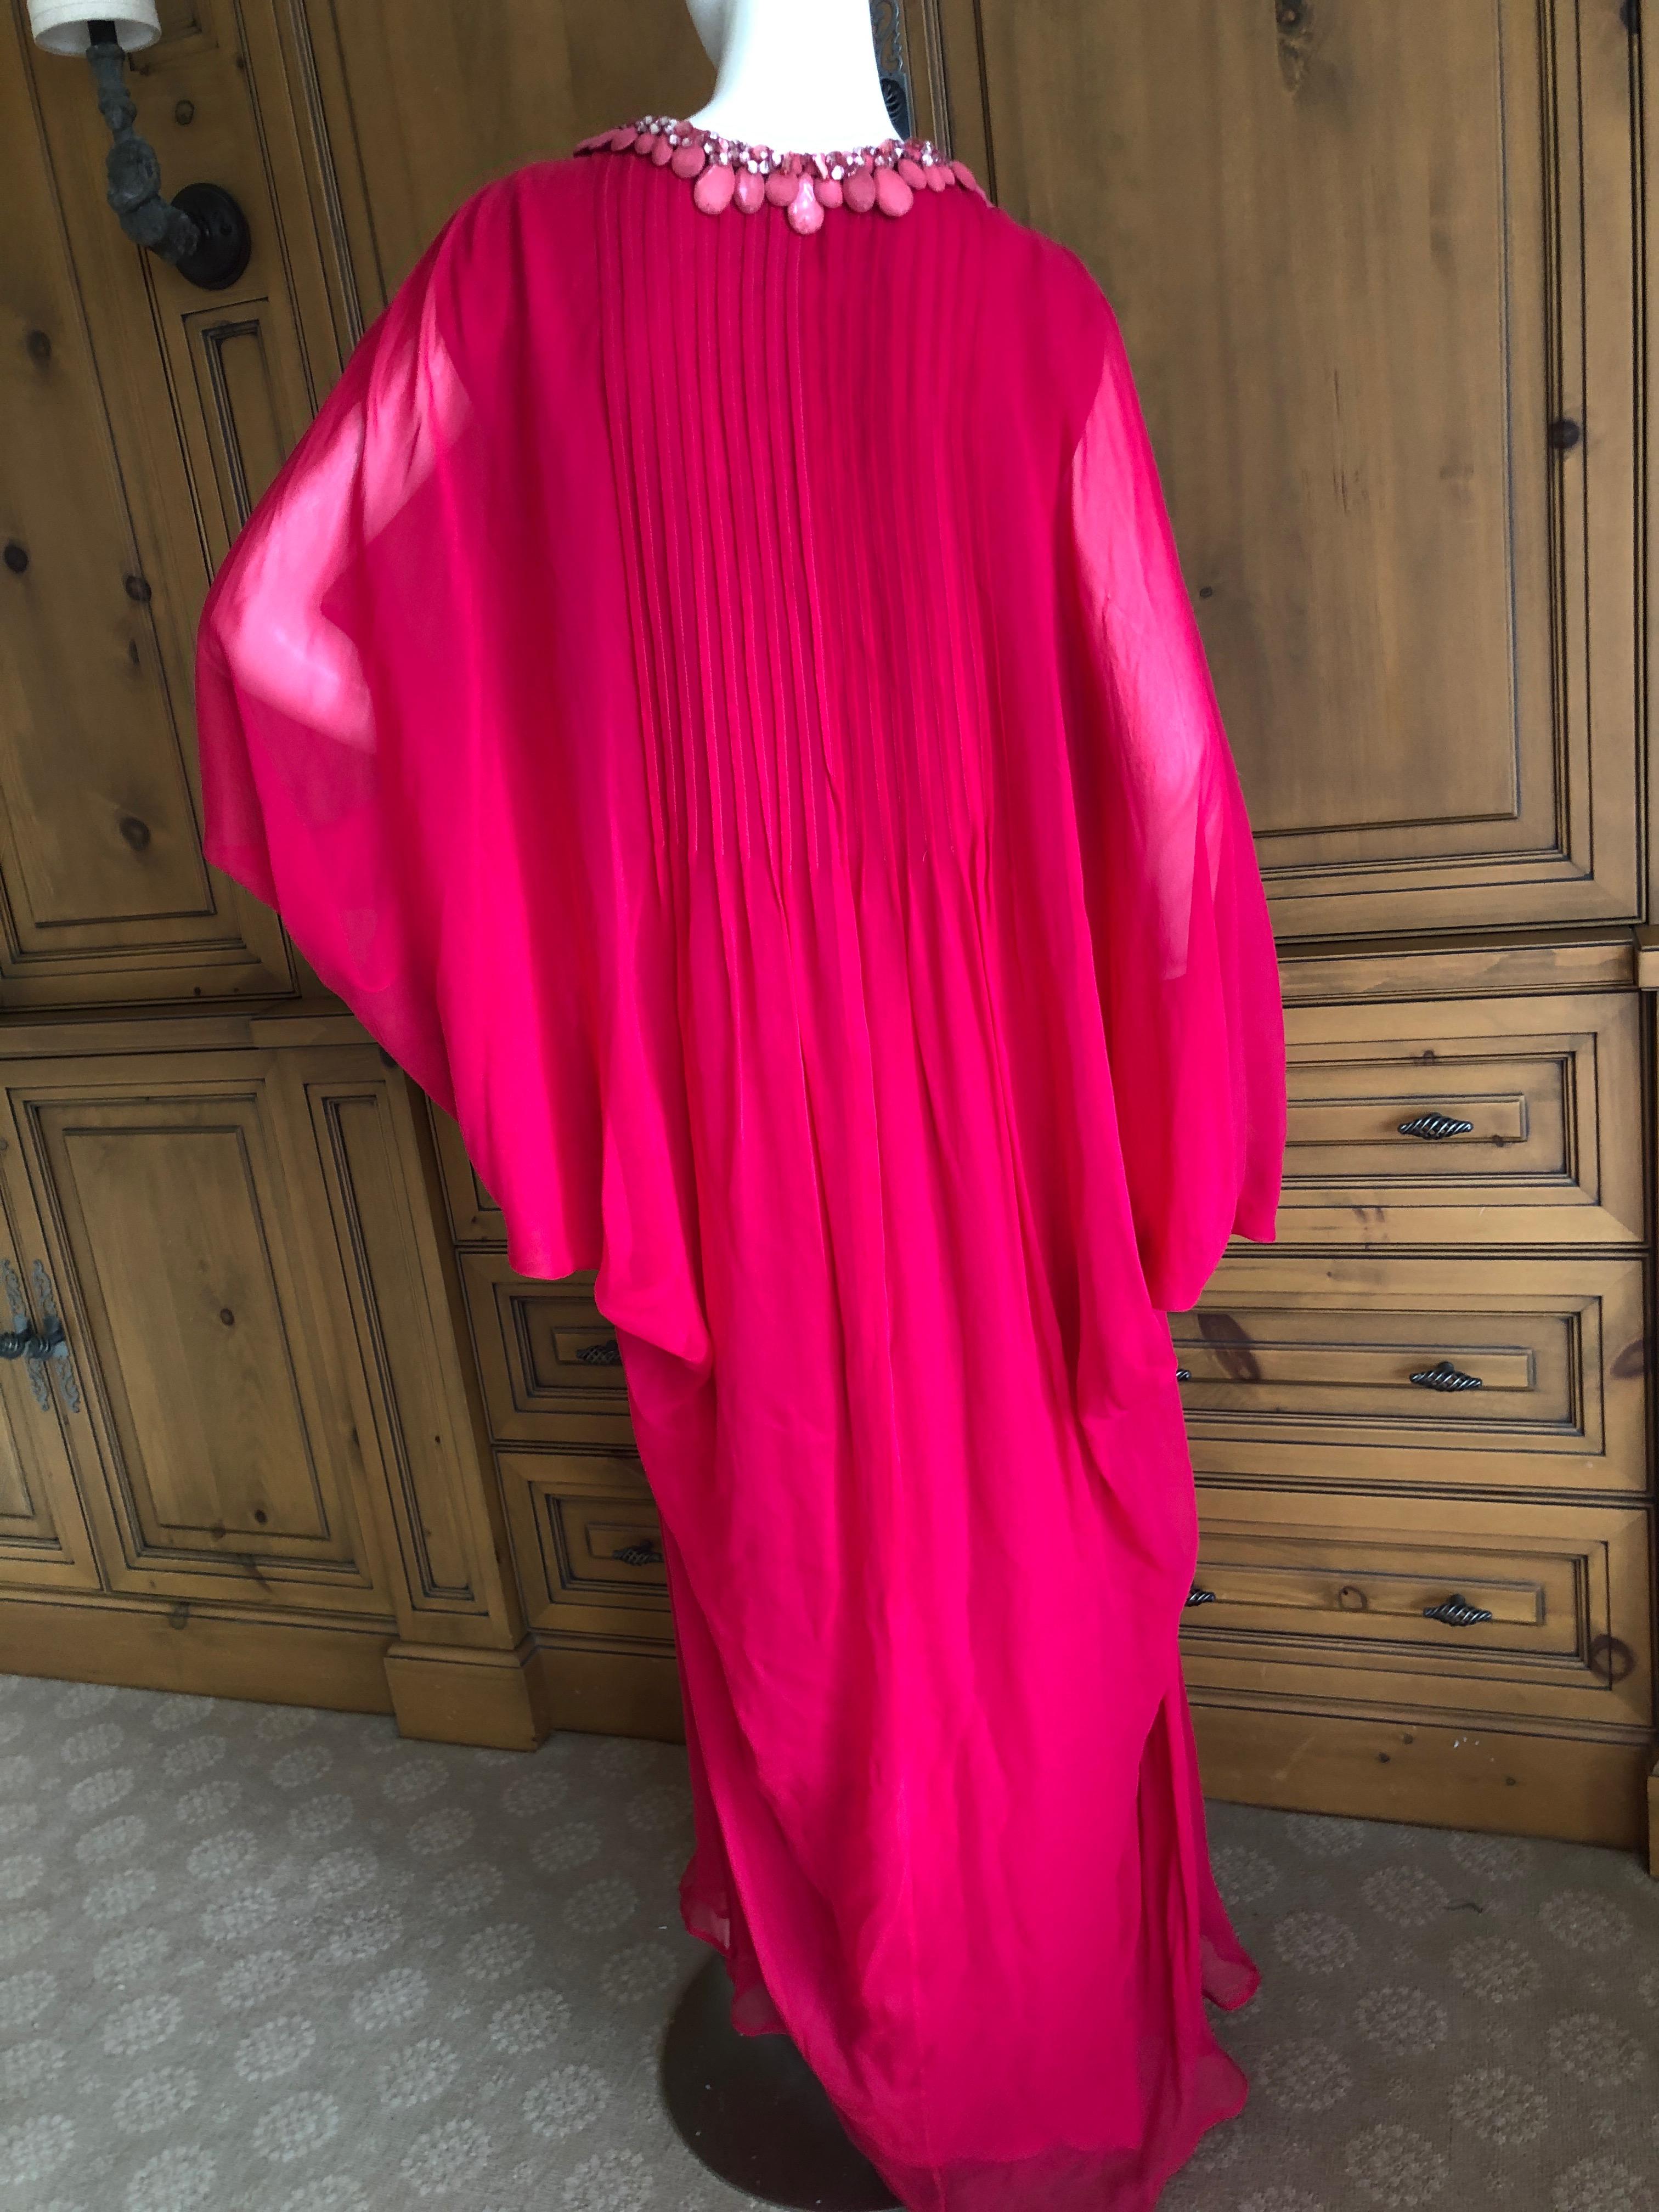 Oscar de la Renta Red Bead Embellished Pleated Silk Chiffon Caftan

This is such a charming piece, please use the zoom feature to see details, there is a sweet necklace at the neckline.
There is no size label , please check the measurements, appx